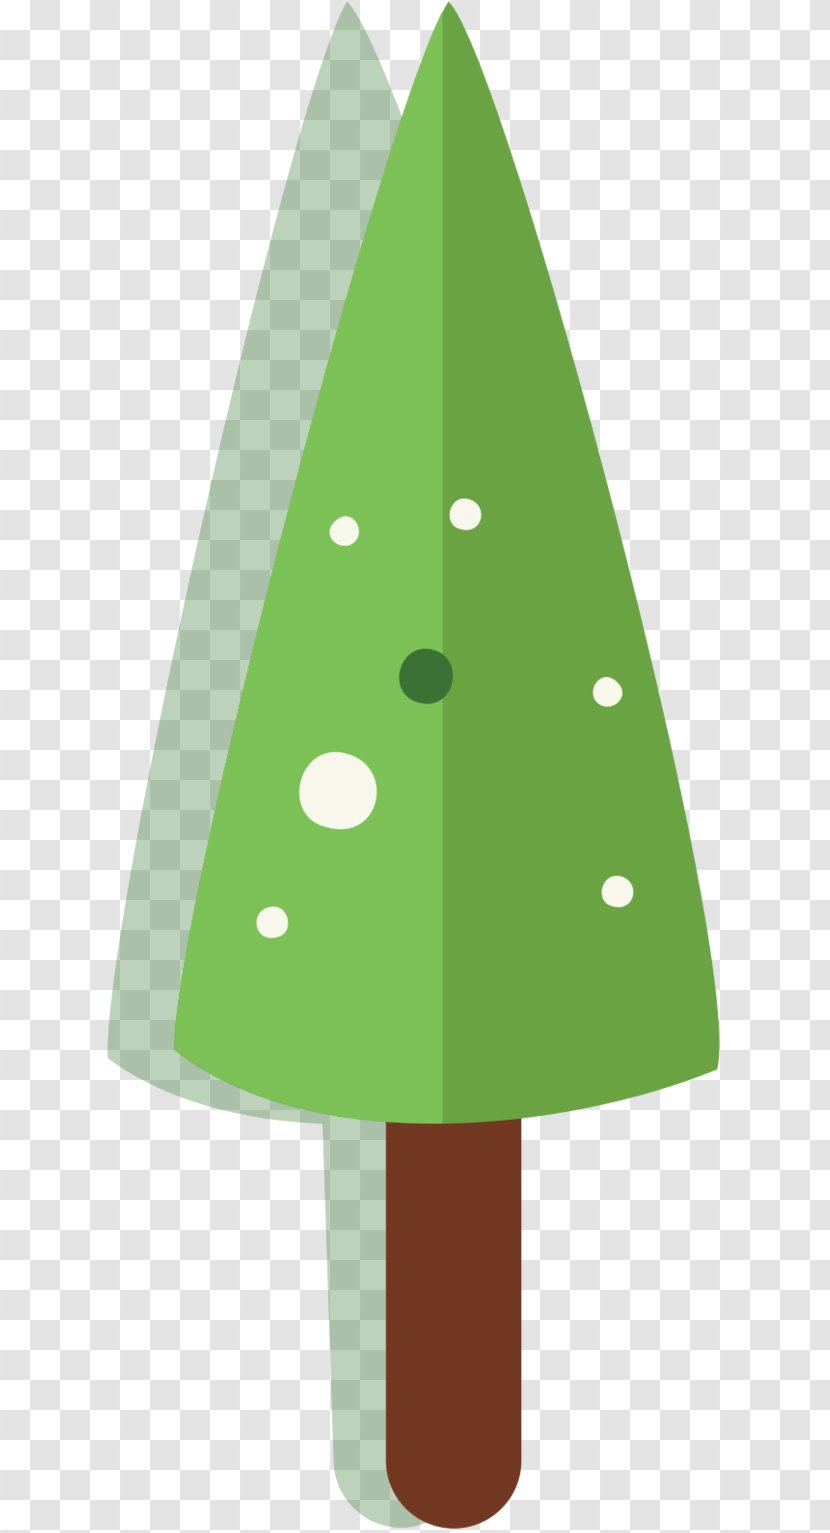 Triangle Product Design Cone Leaf - Christmas Tree Transparent PNG